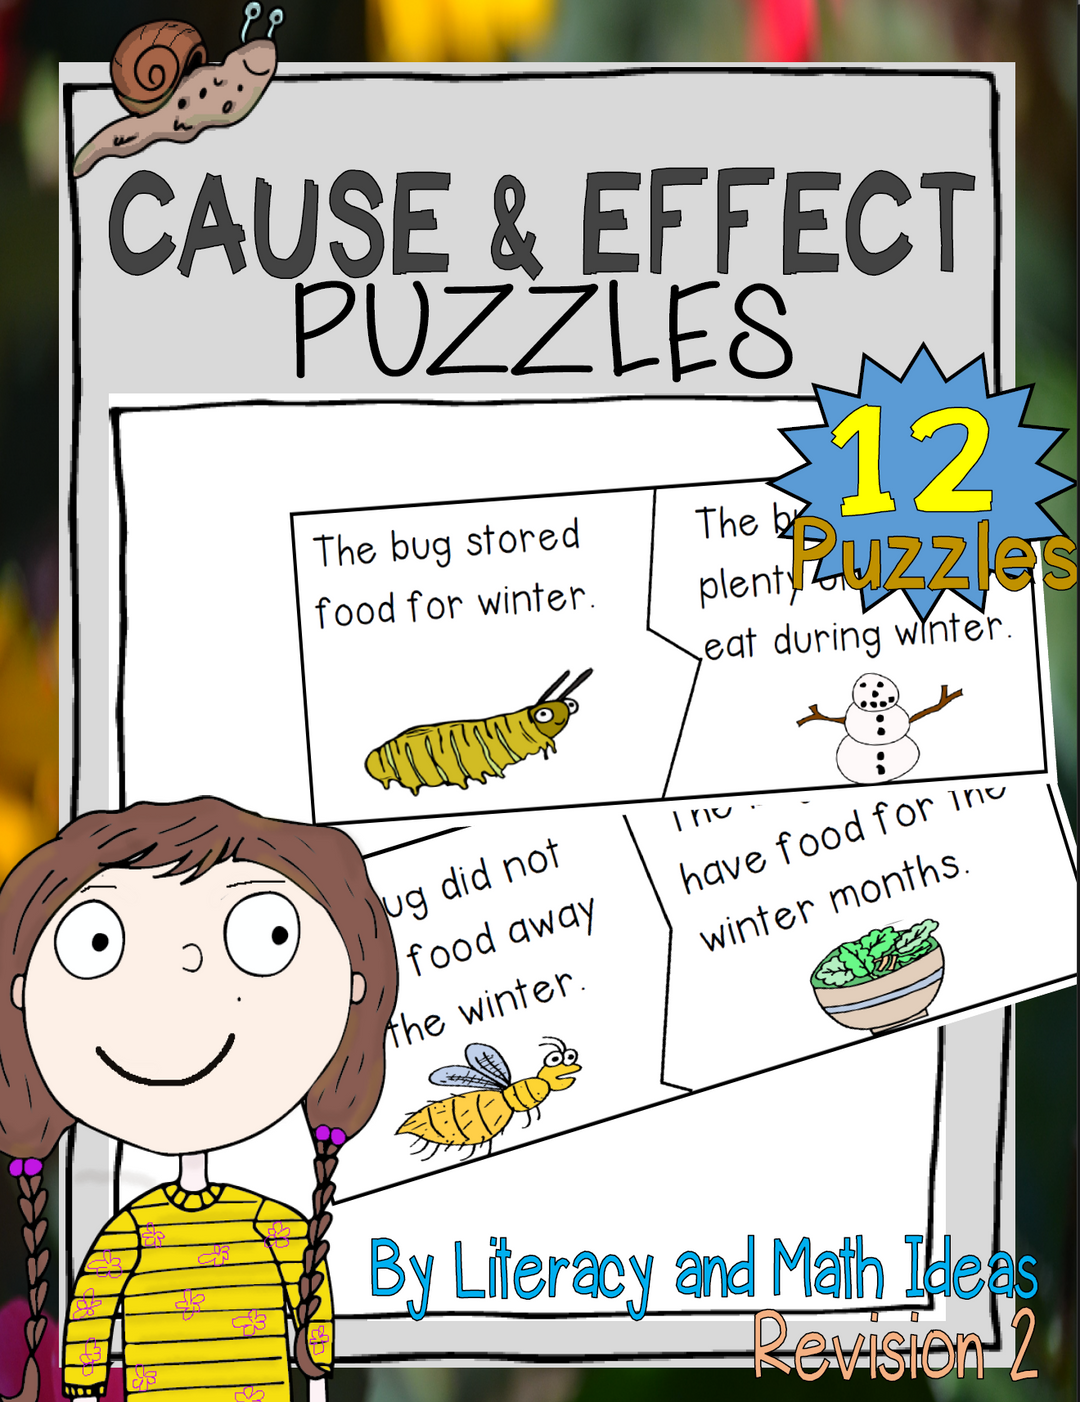 Cause & Effect Puzzles